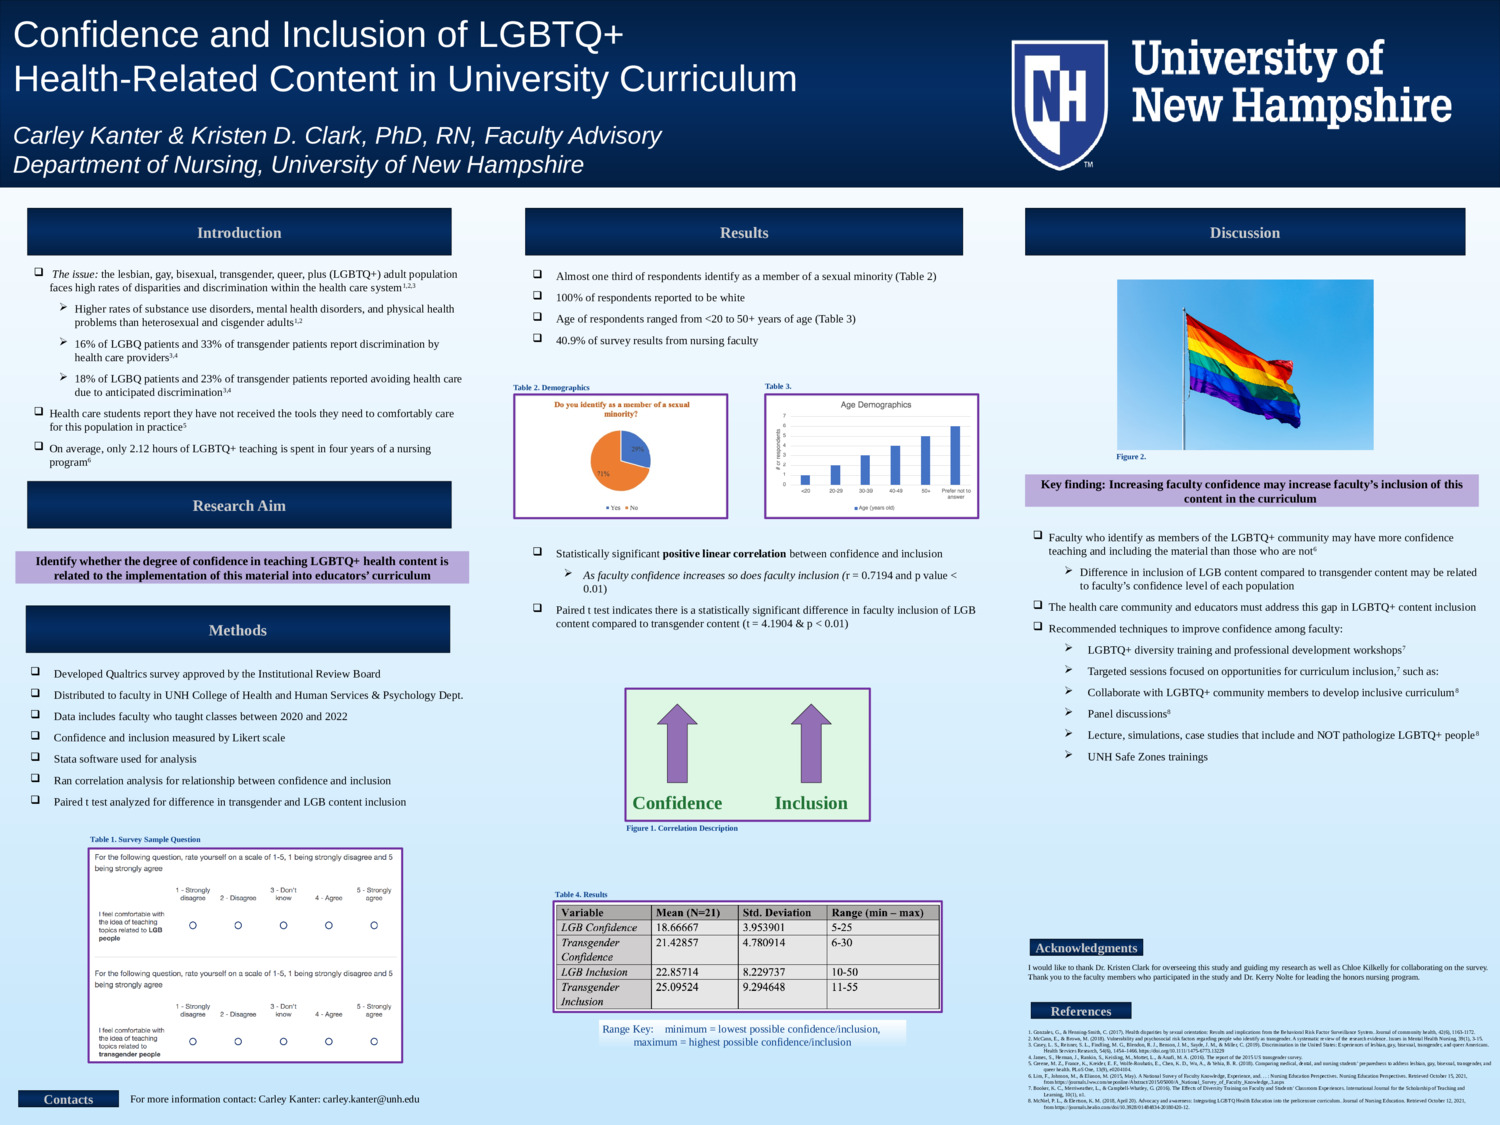 Confidence And Inclusion Of Lgbtq+ Health-Related Content In University Curriculum by csk1011